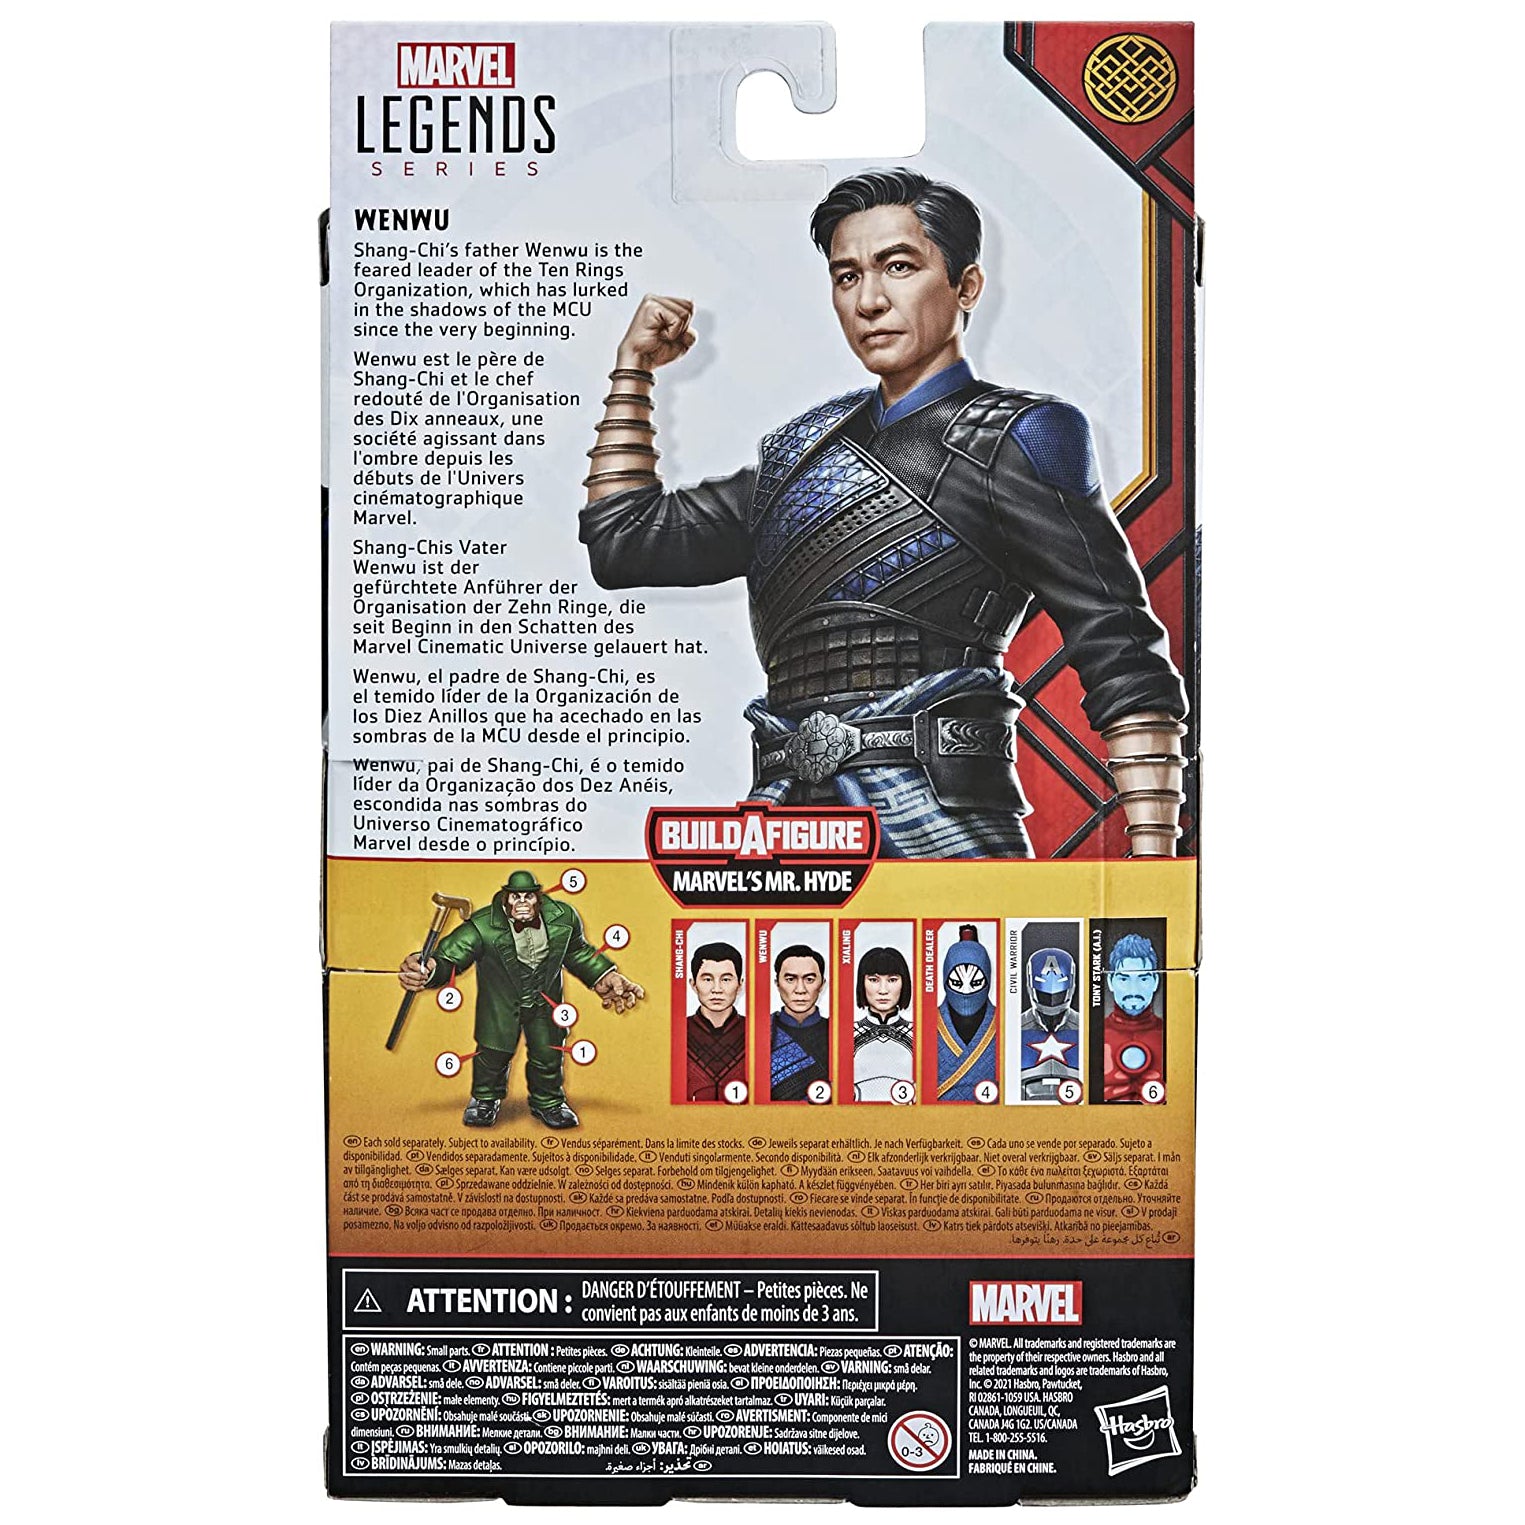 Marvel Legends Shang-Chi Legend of the Ten Rings Wenwu Figure